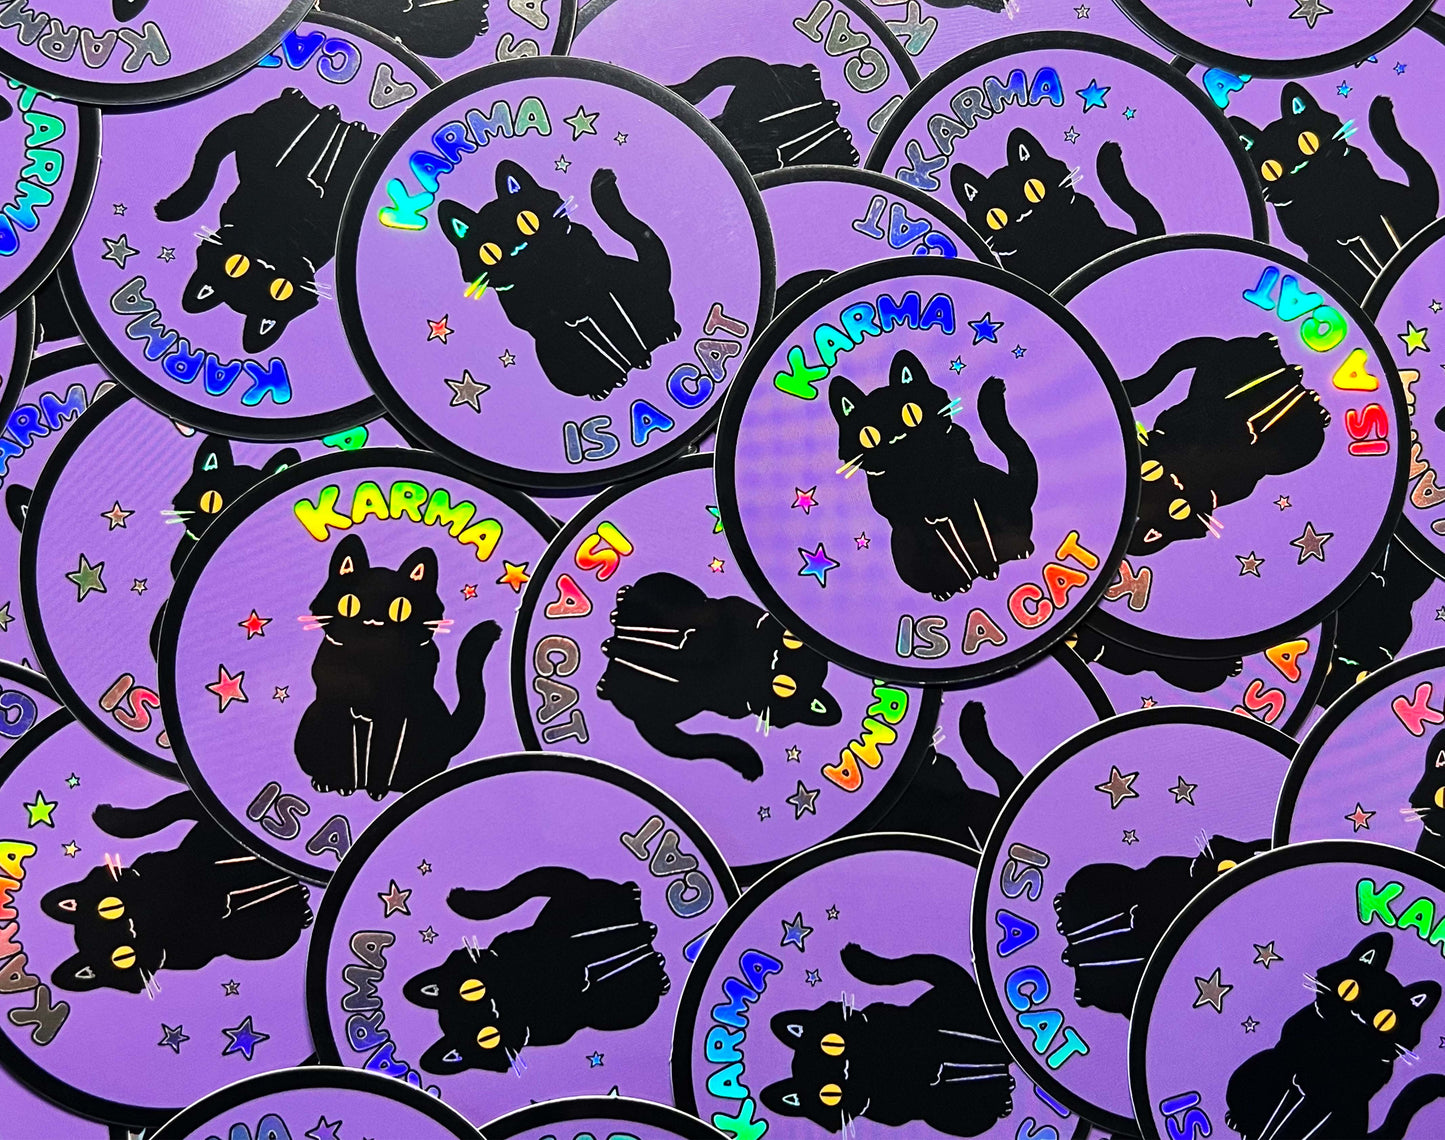 Karma is a Cat - Taylor Swift - Holographic Sticker